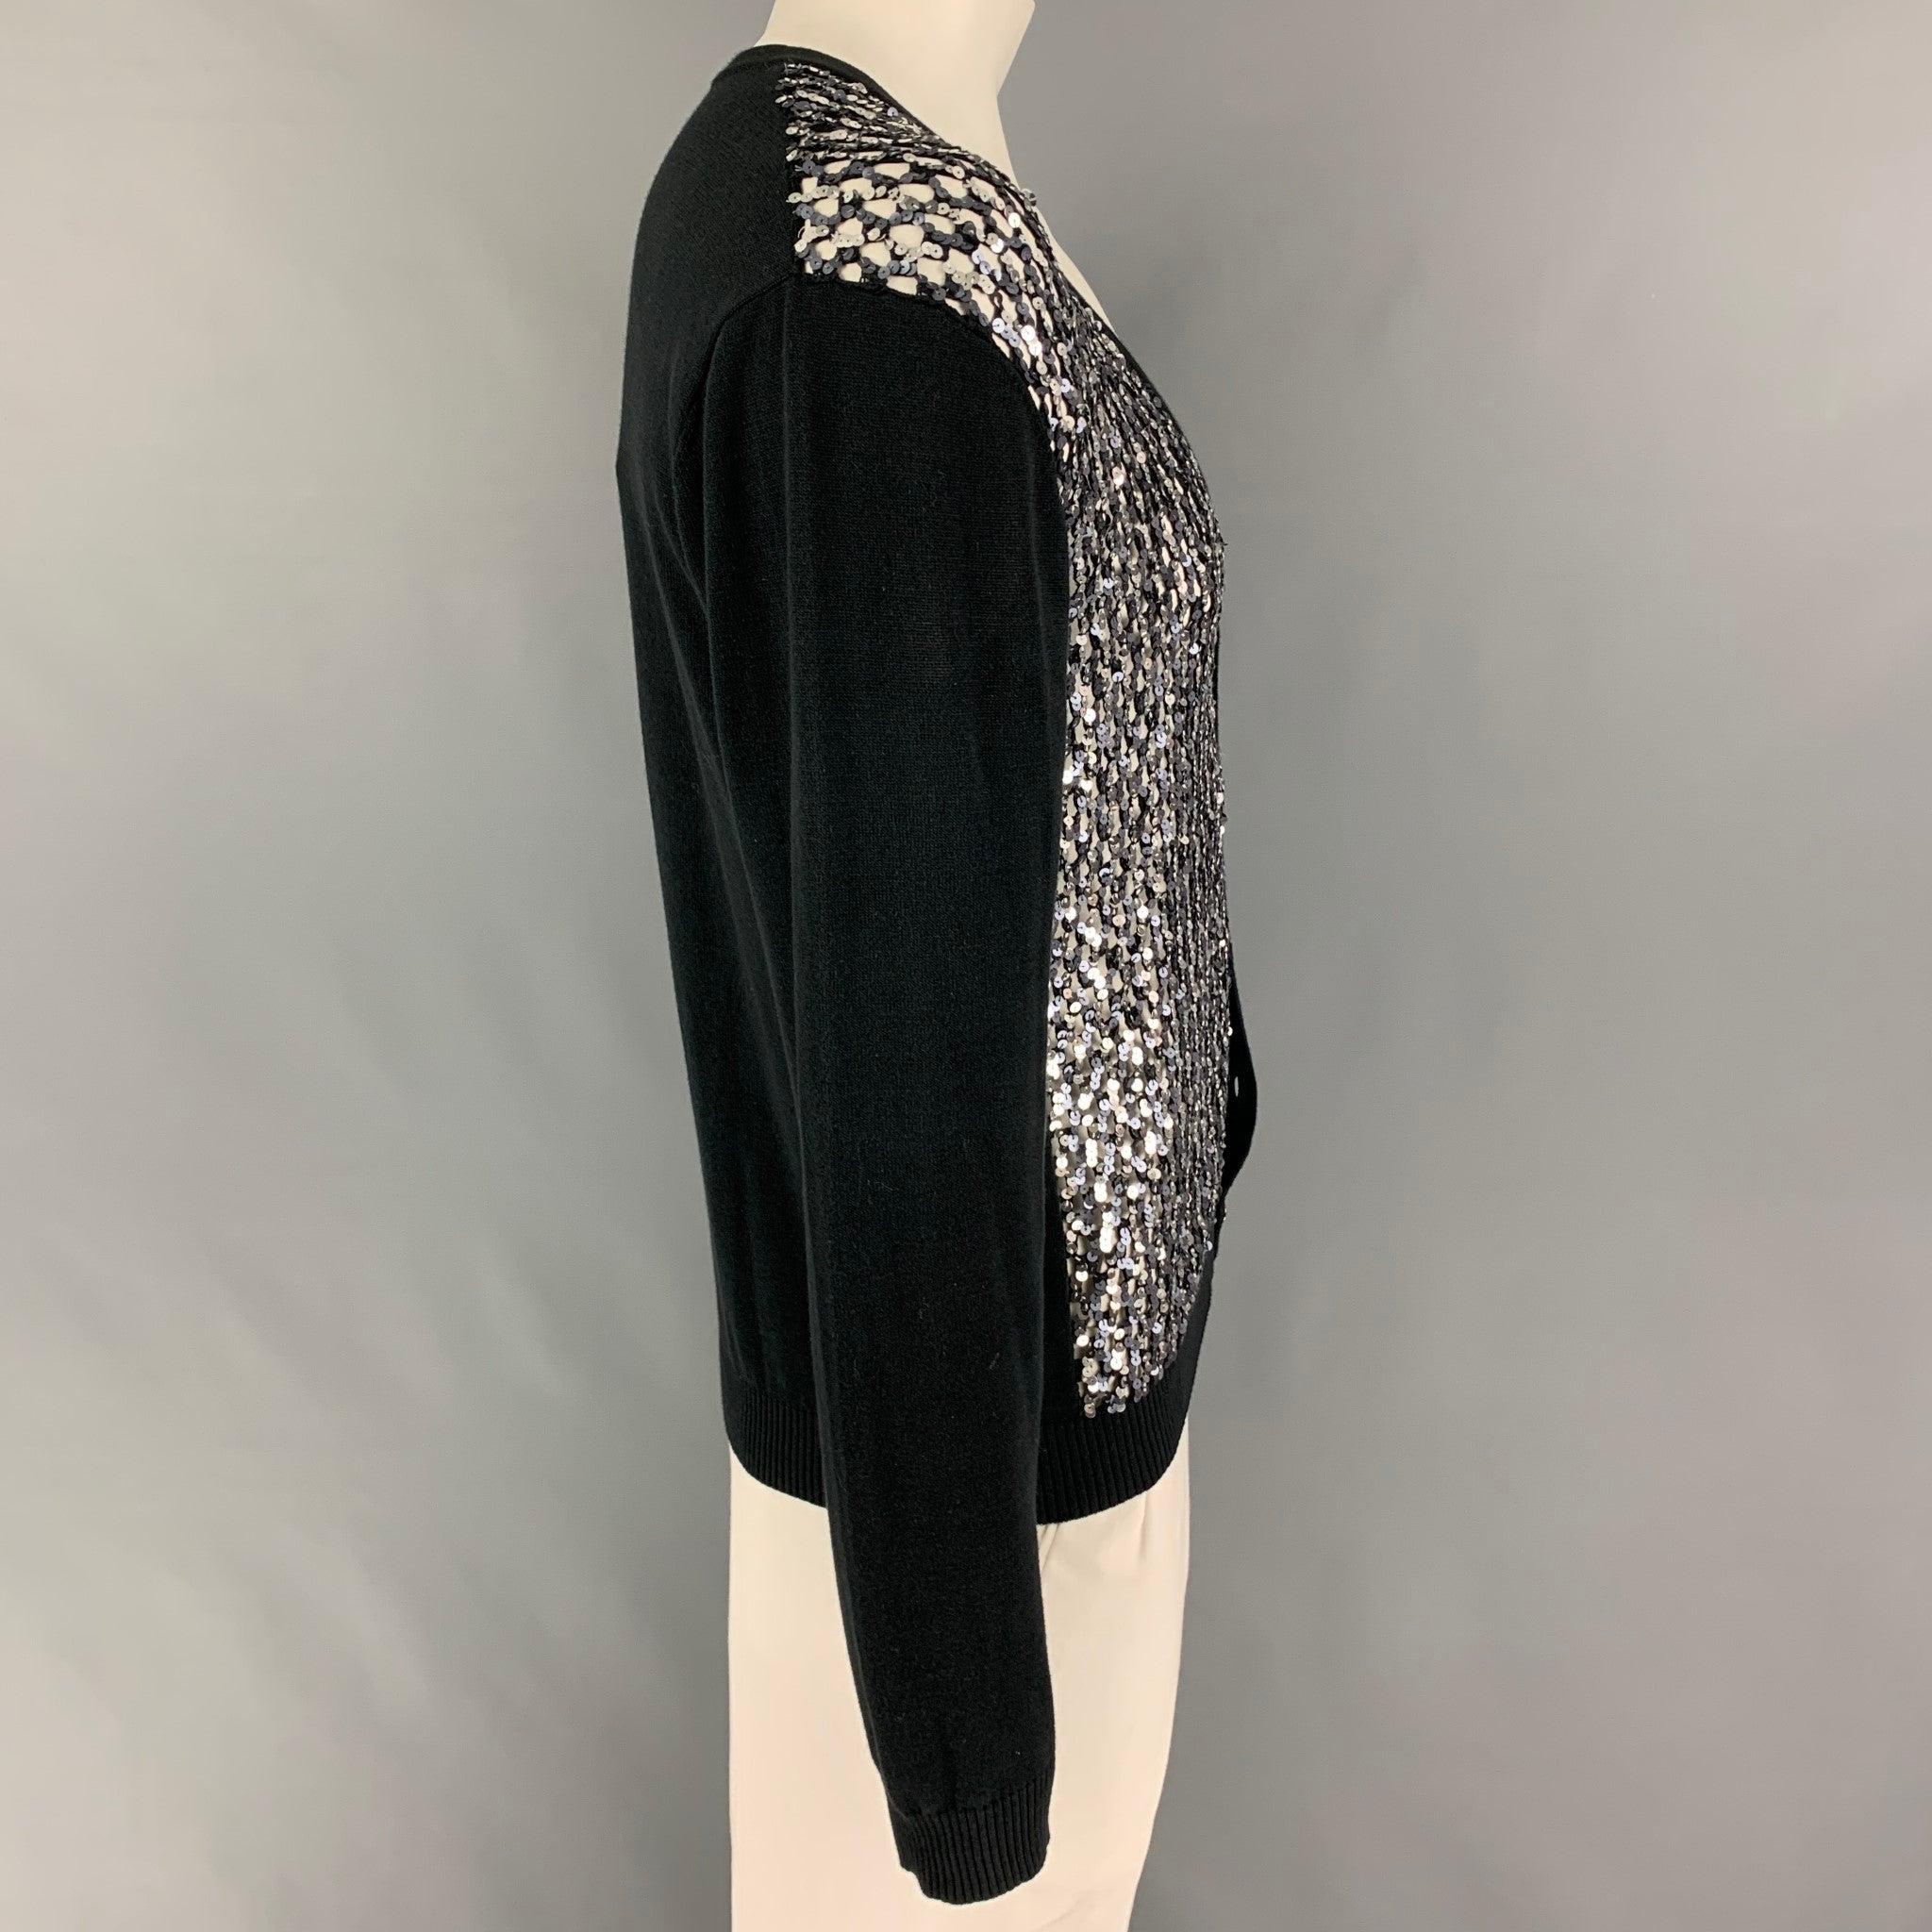 JOHN RICHMOND cardigan comes in a black & silver sequined cotton / PVC featuring a knitted see through design and a buttoned closure. Made in Italy. New with tags.
 

Marked:   54 

Measurements: 
 
Shoulder: 19.5 inches Chest: 44 inches Sleeve: